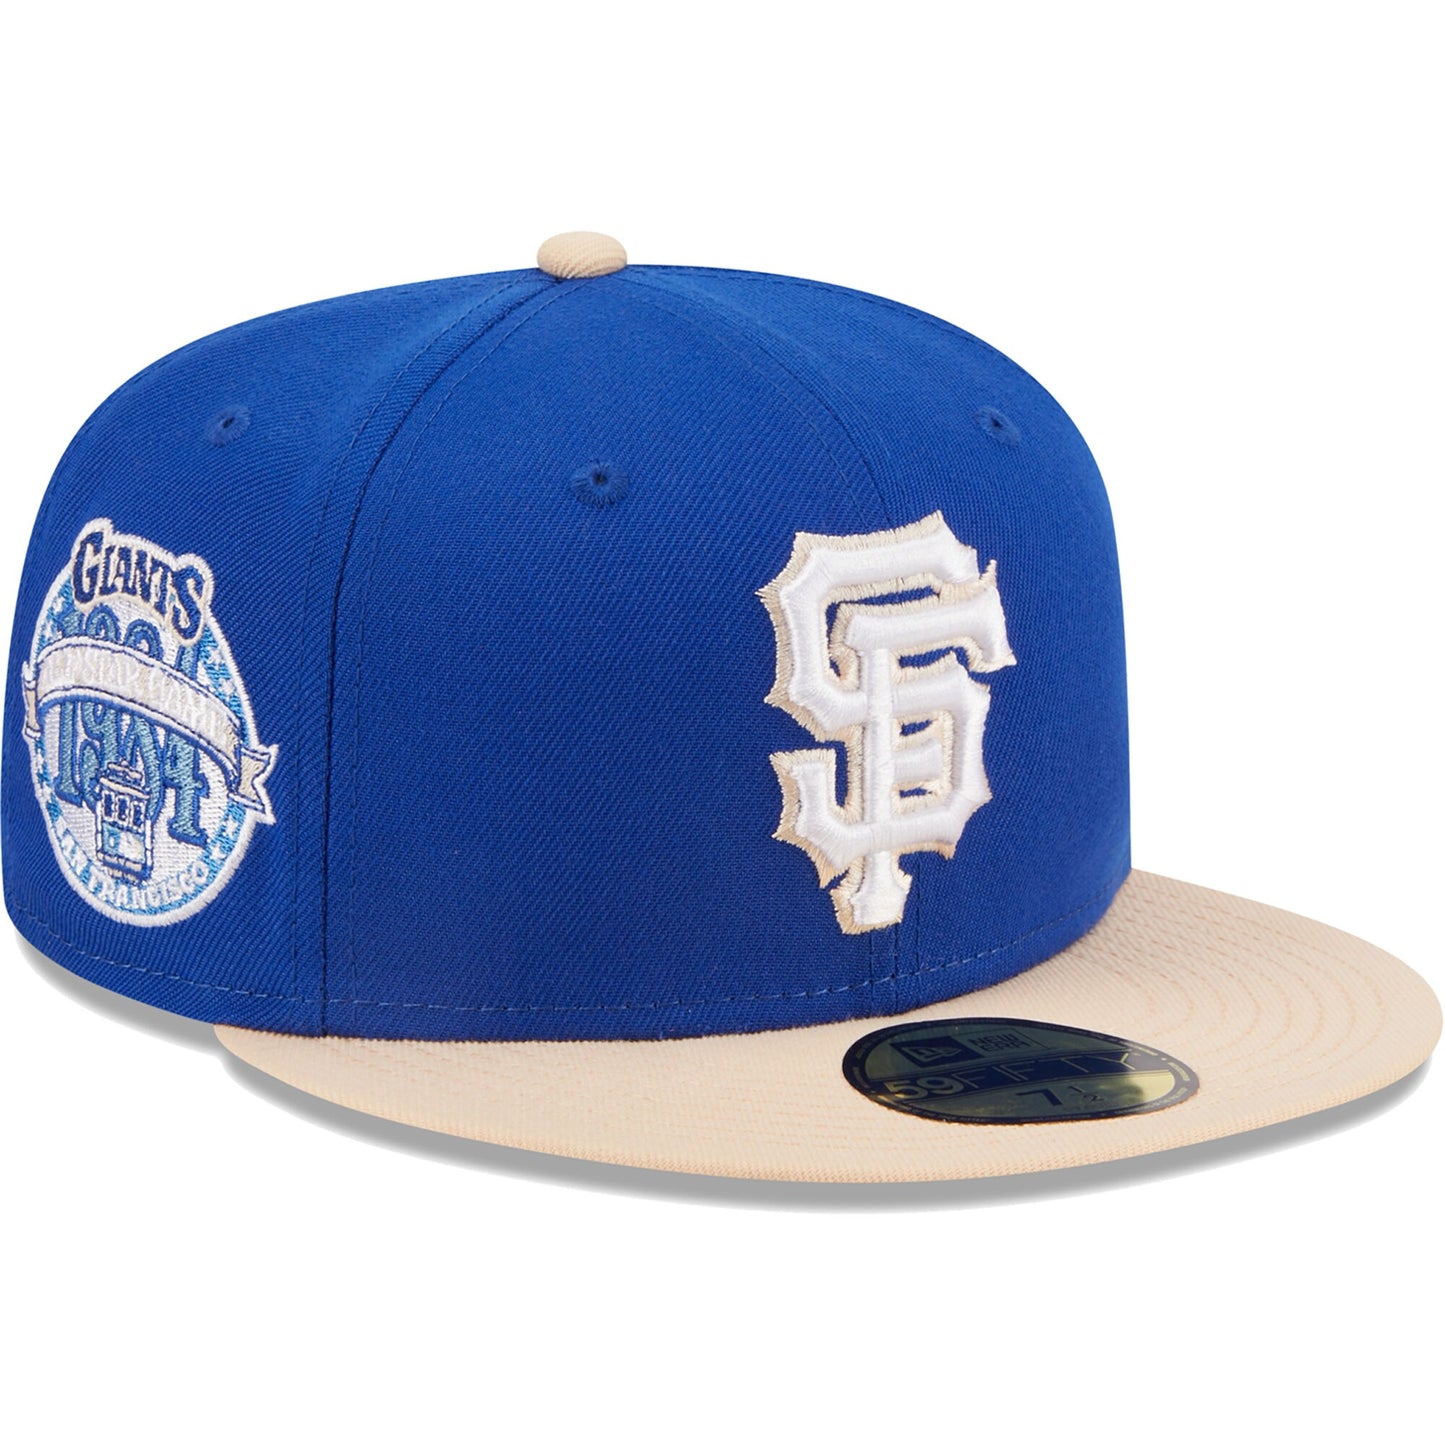 San Francisco Giants New Era 59FIFTY Fitted Hat - Royal